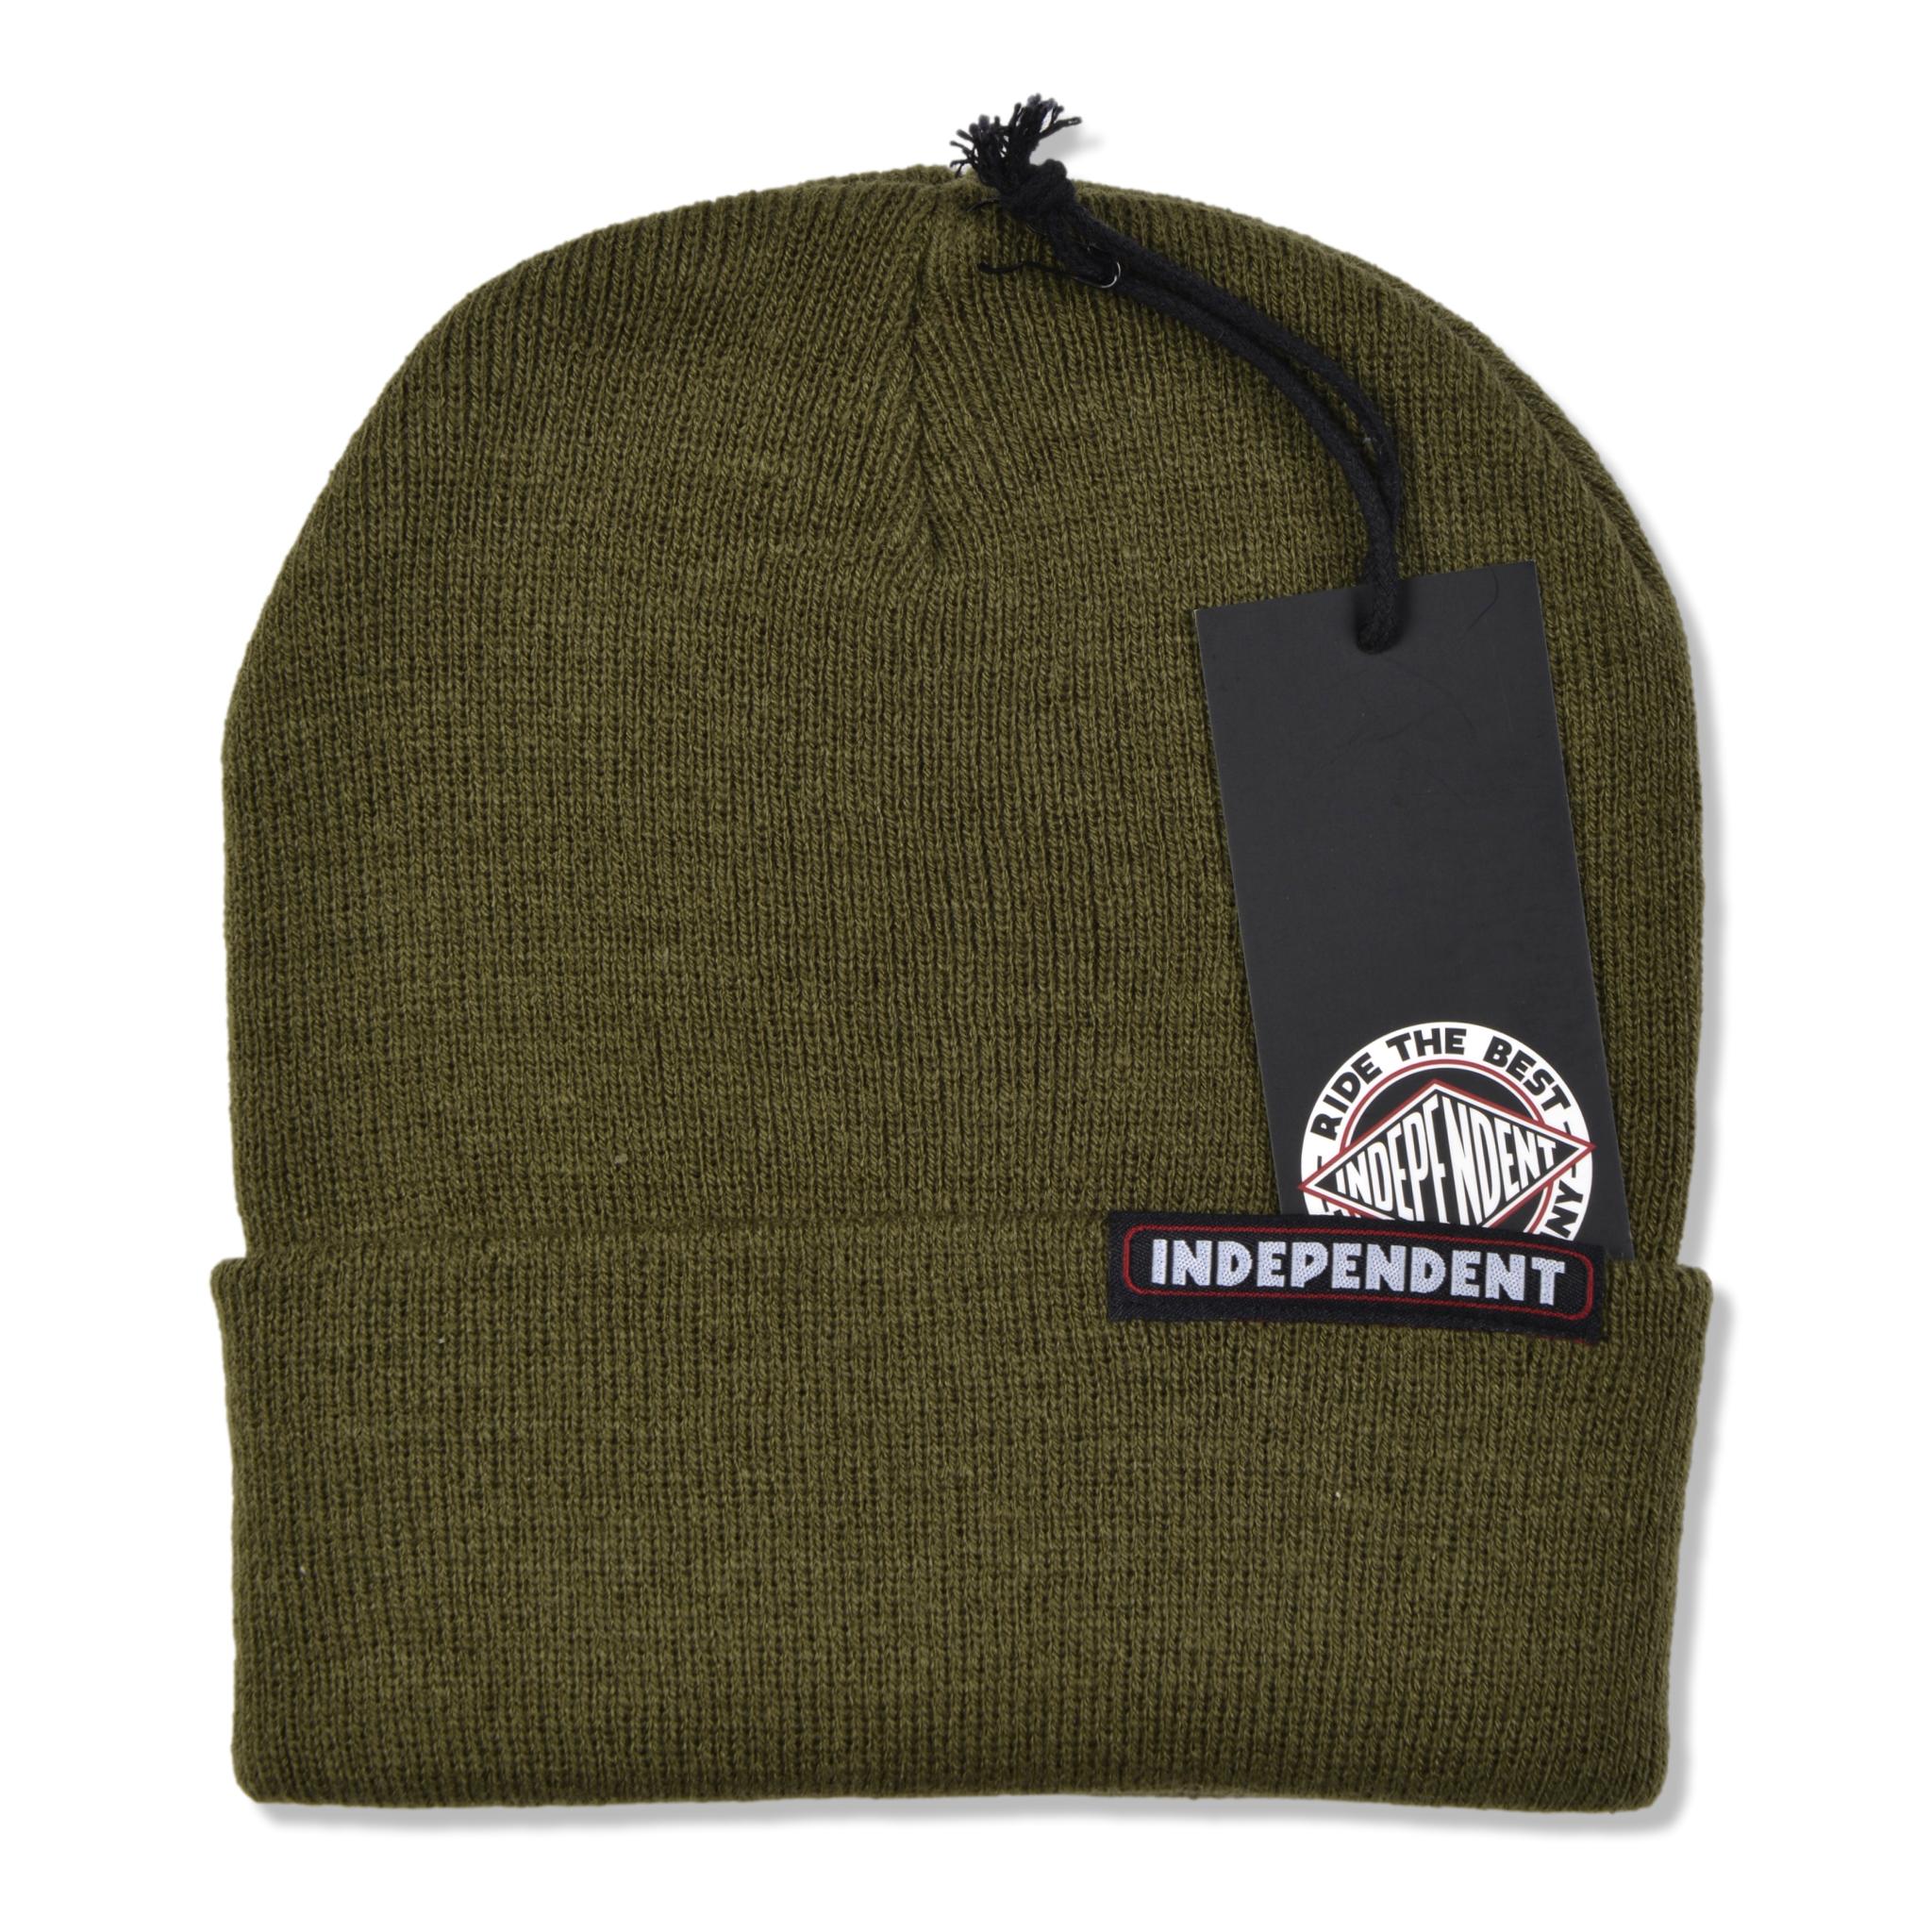 INDEPENDENT BAR BEANIE OLIVE